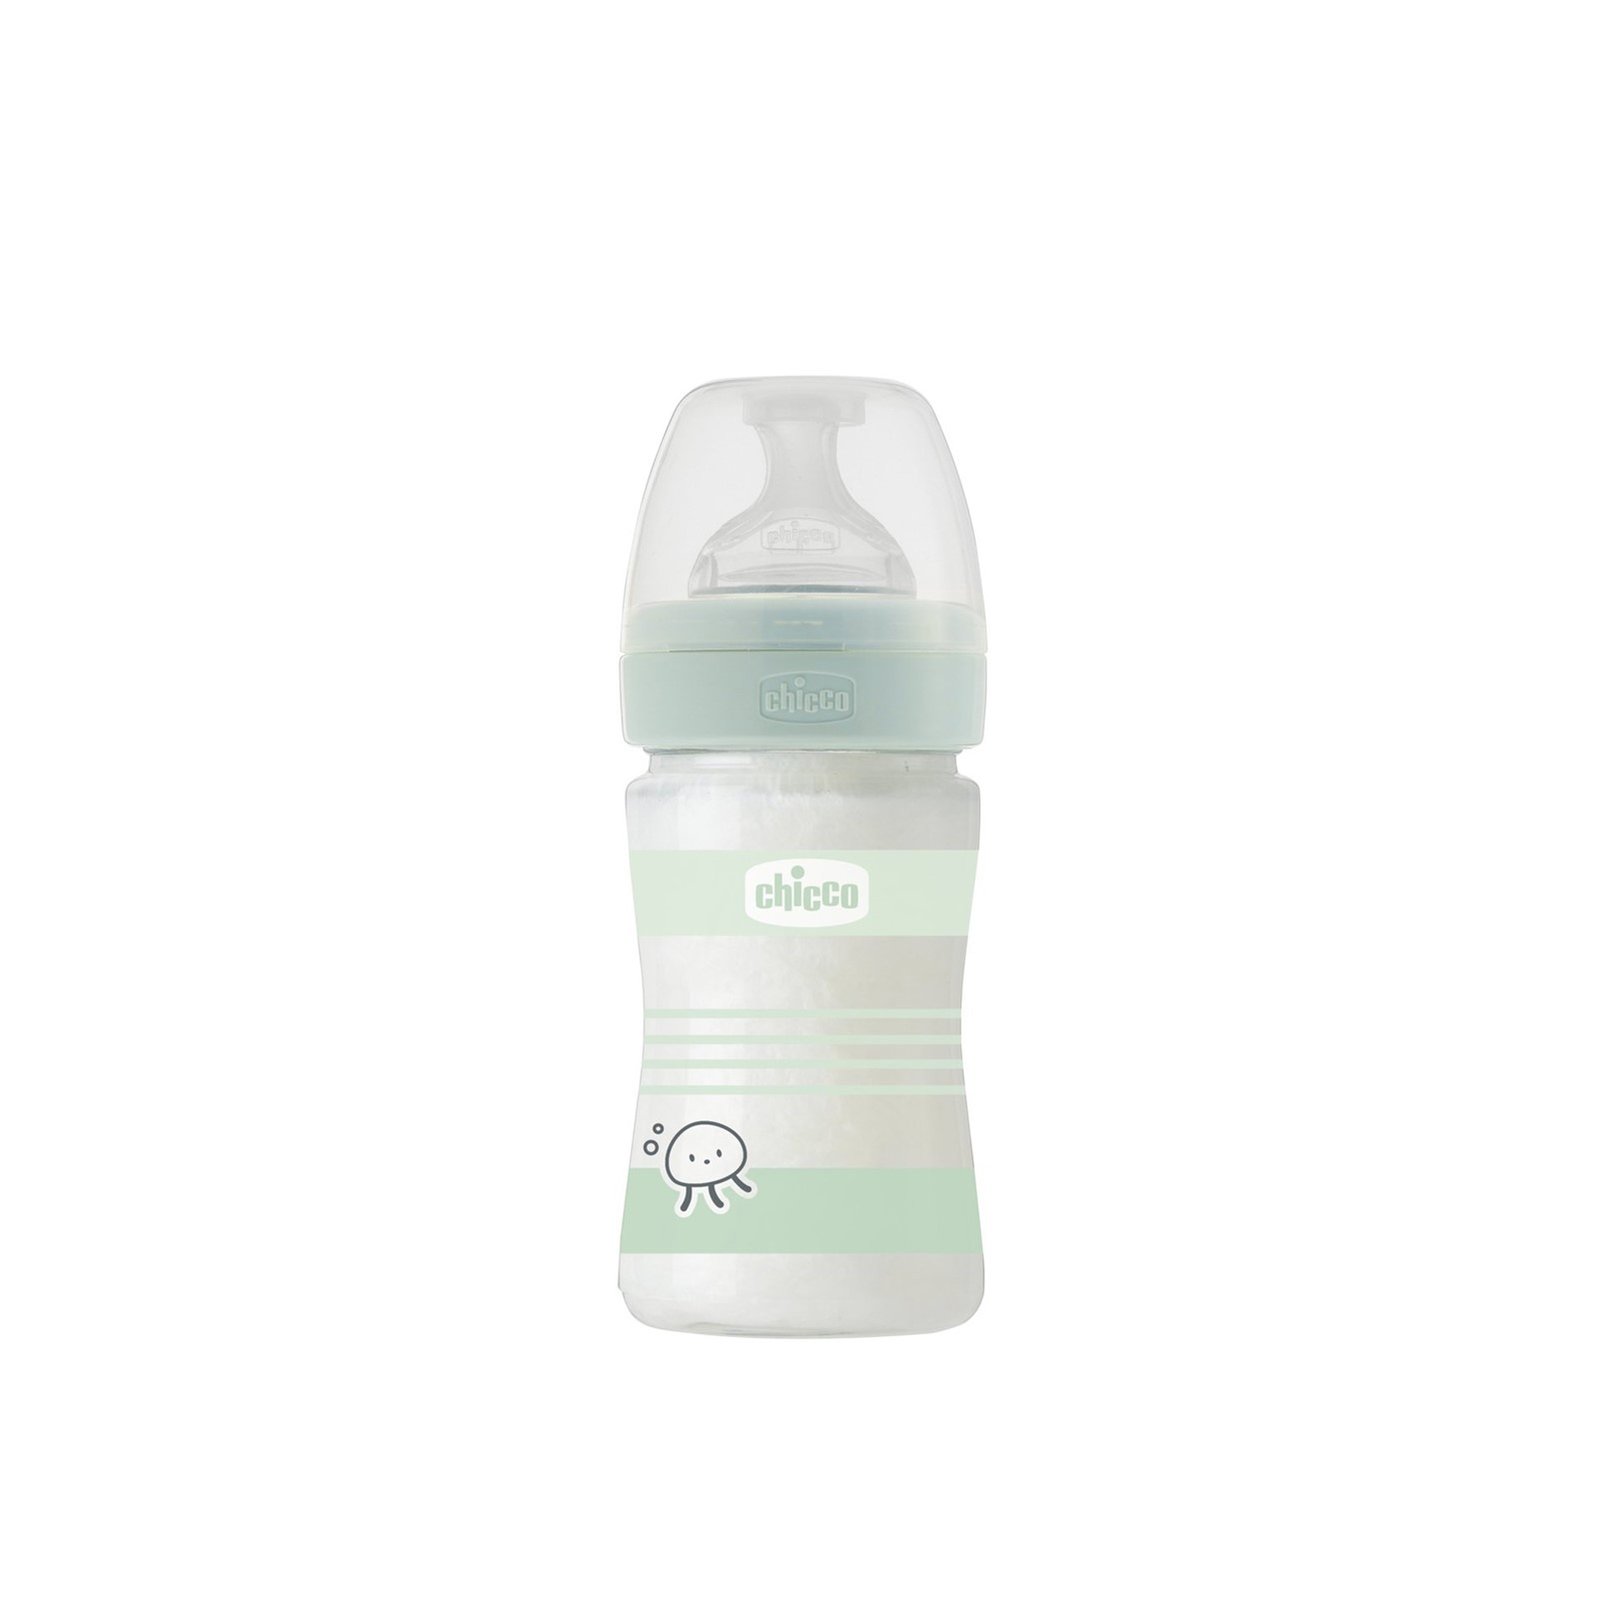 Chicco Well-Being Slow Flow Glass Bottle 0m+ Green 150ml (5.0 fl oz)